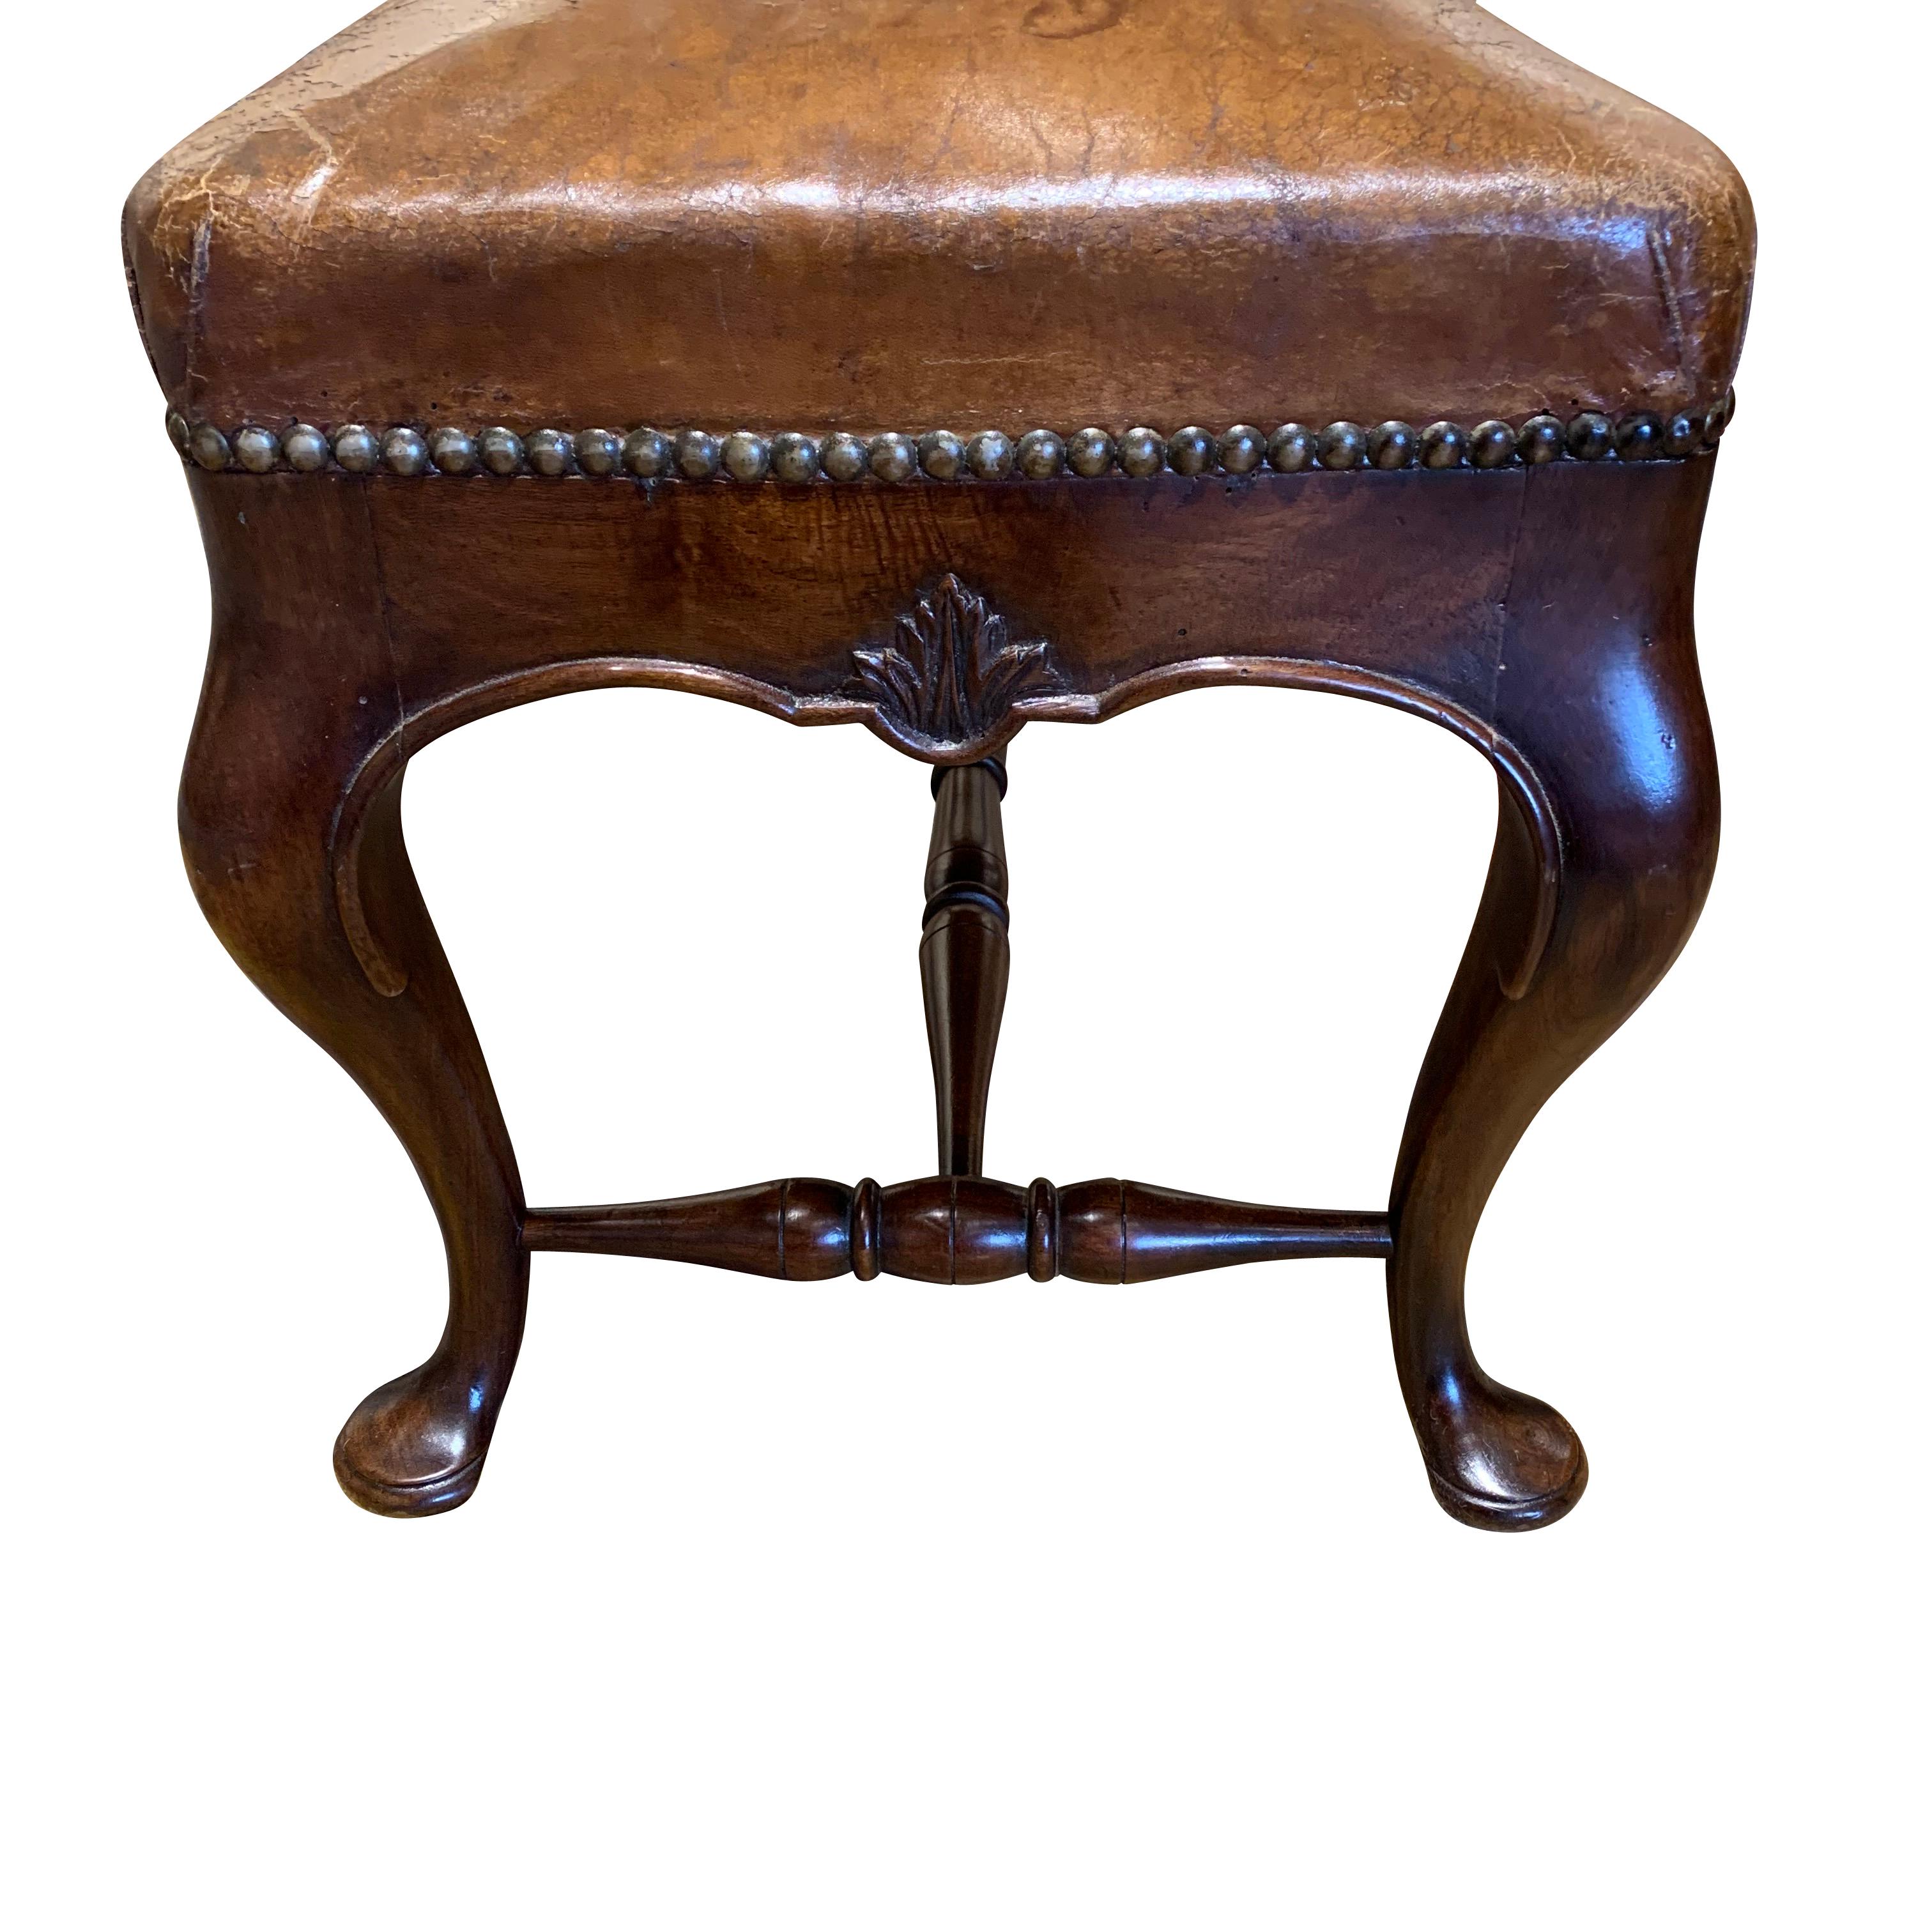 19th century English leather top bench
Cabriolet legs and brass tack details